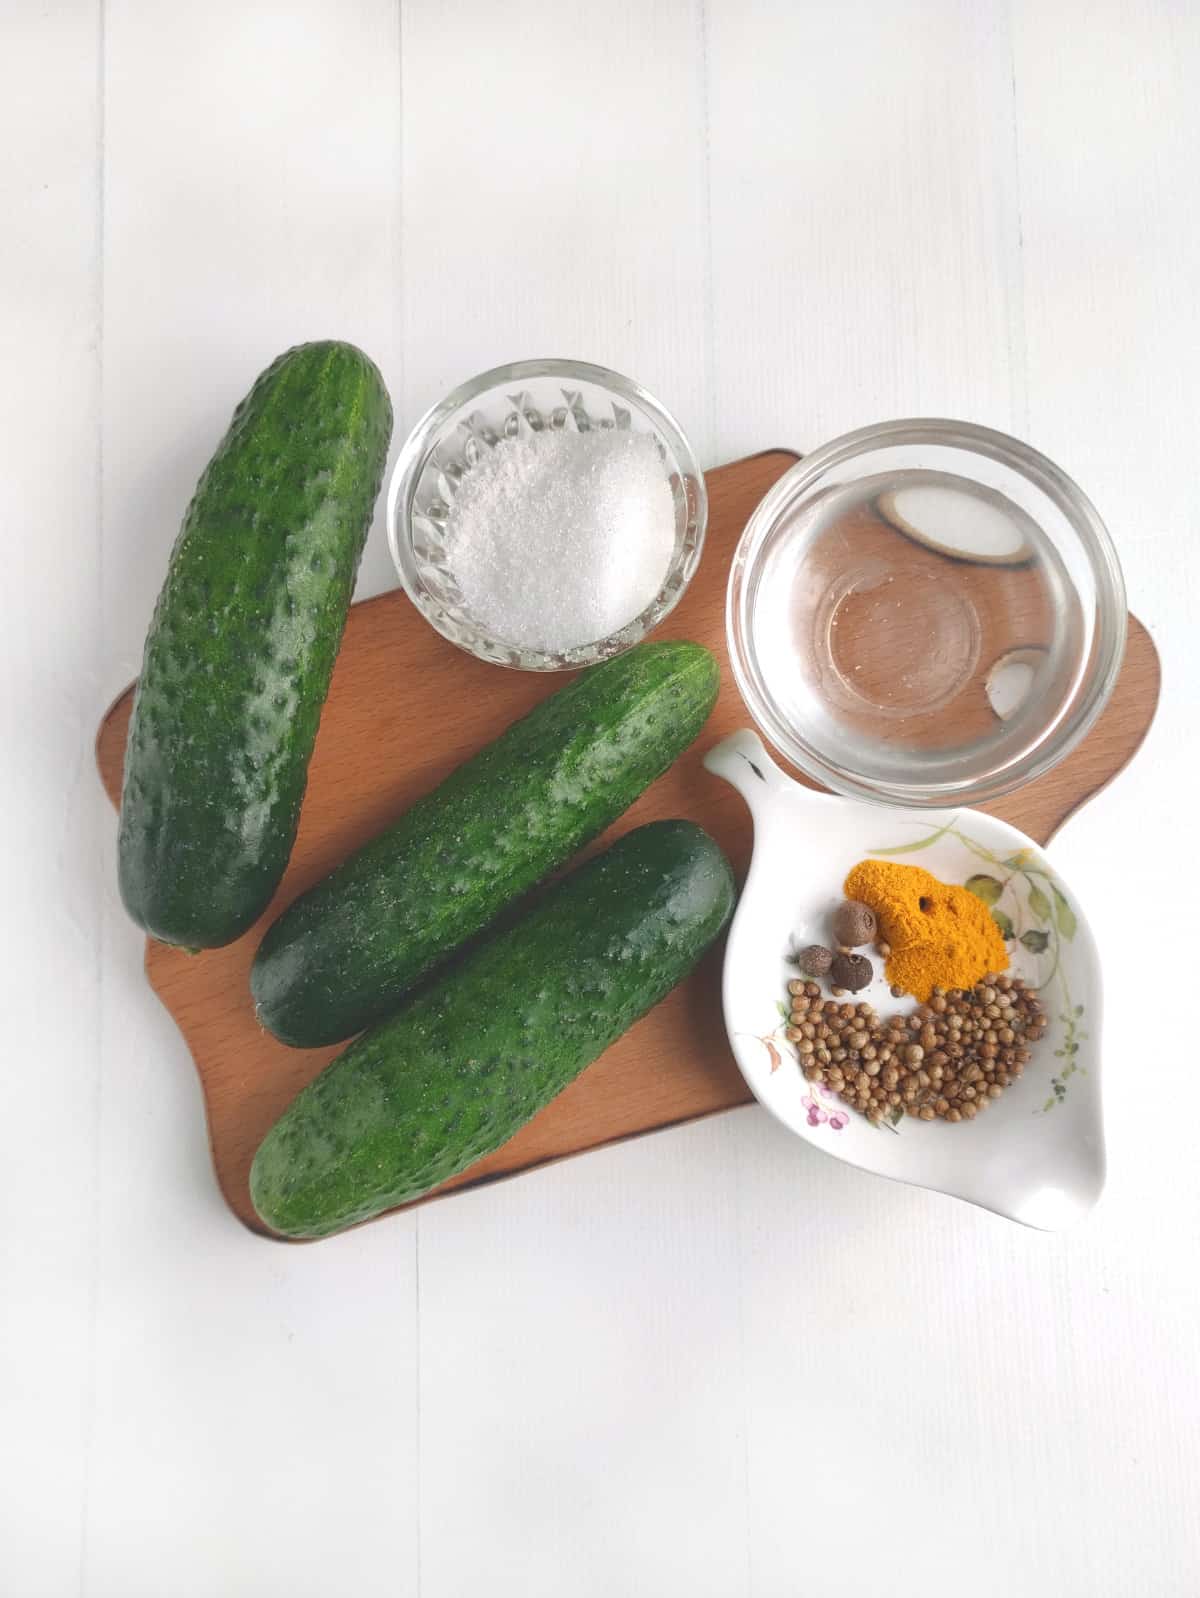 cucumbers, white vinegar, sugar, and bowl of pickling spices.